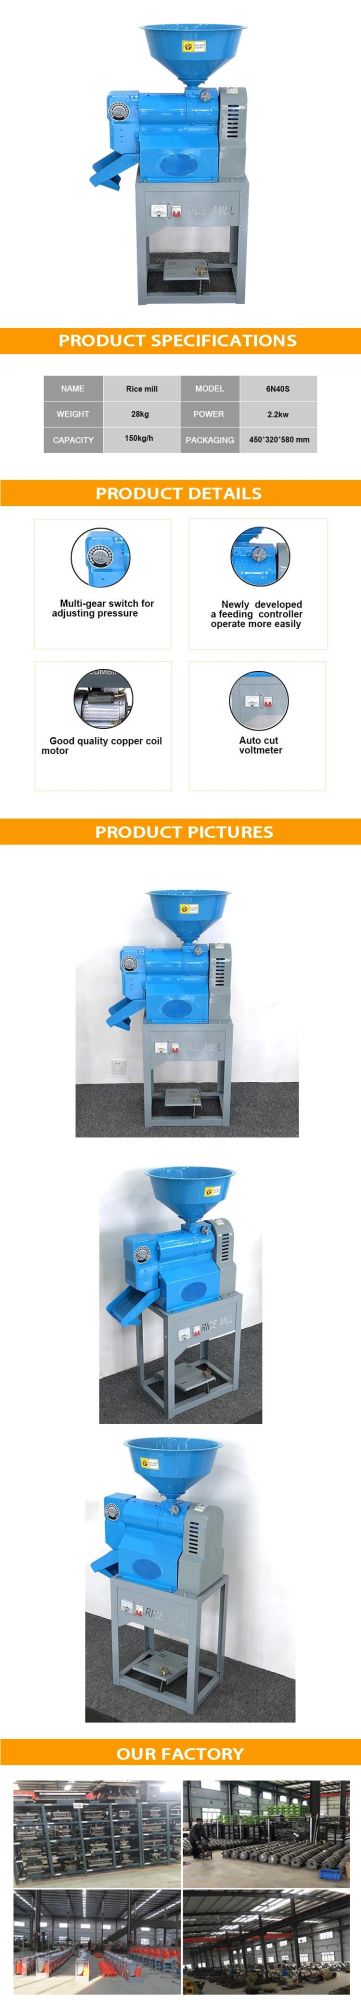 Hot Sale Iron Rice Mill Machine for Home Use